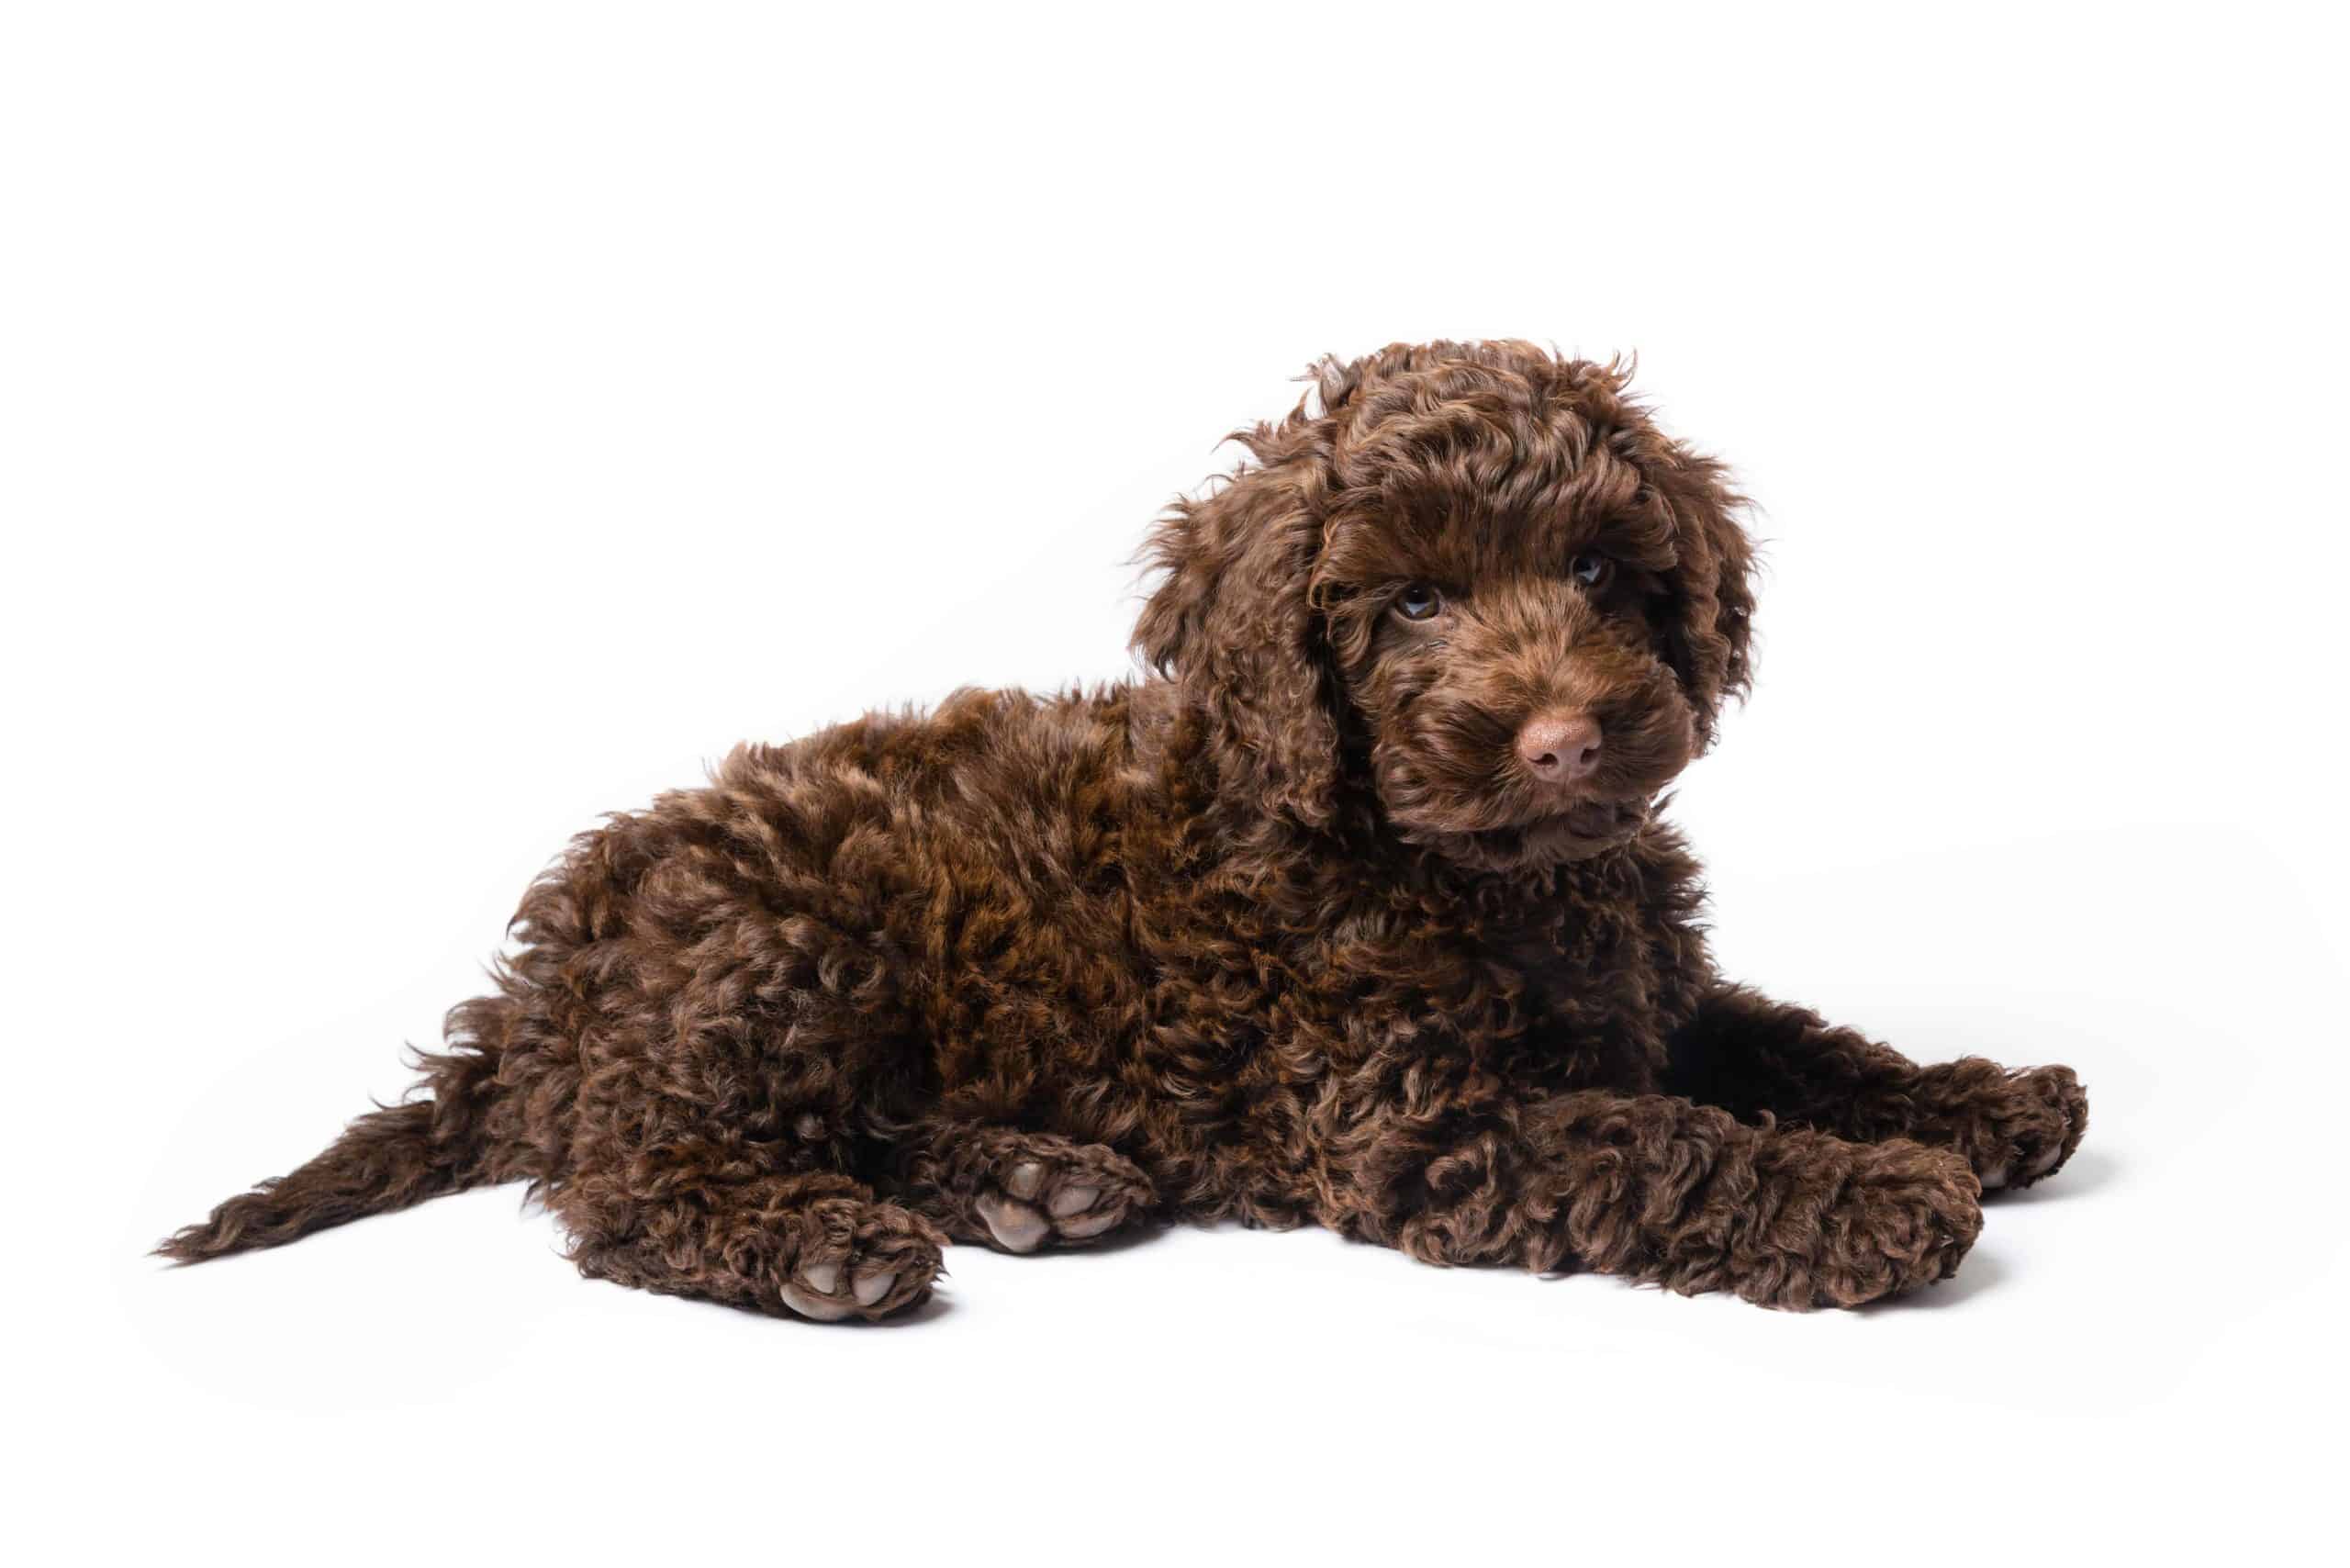 Chocolate labradoodle puppy on white background. Your Labradoodle puppy will have a long and happy life if you provide proper care. Use these helpful pointers to care for your puppy.